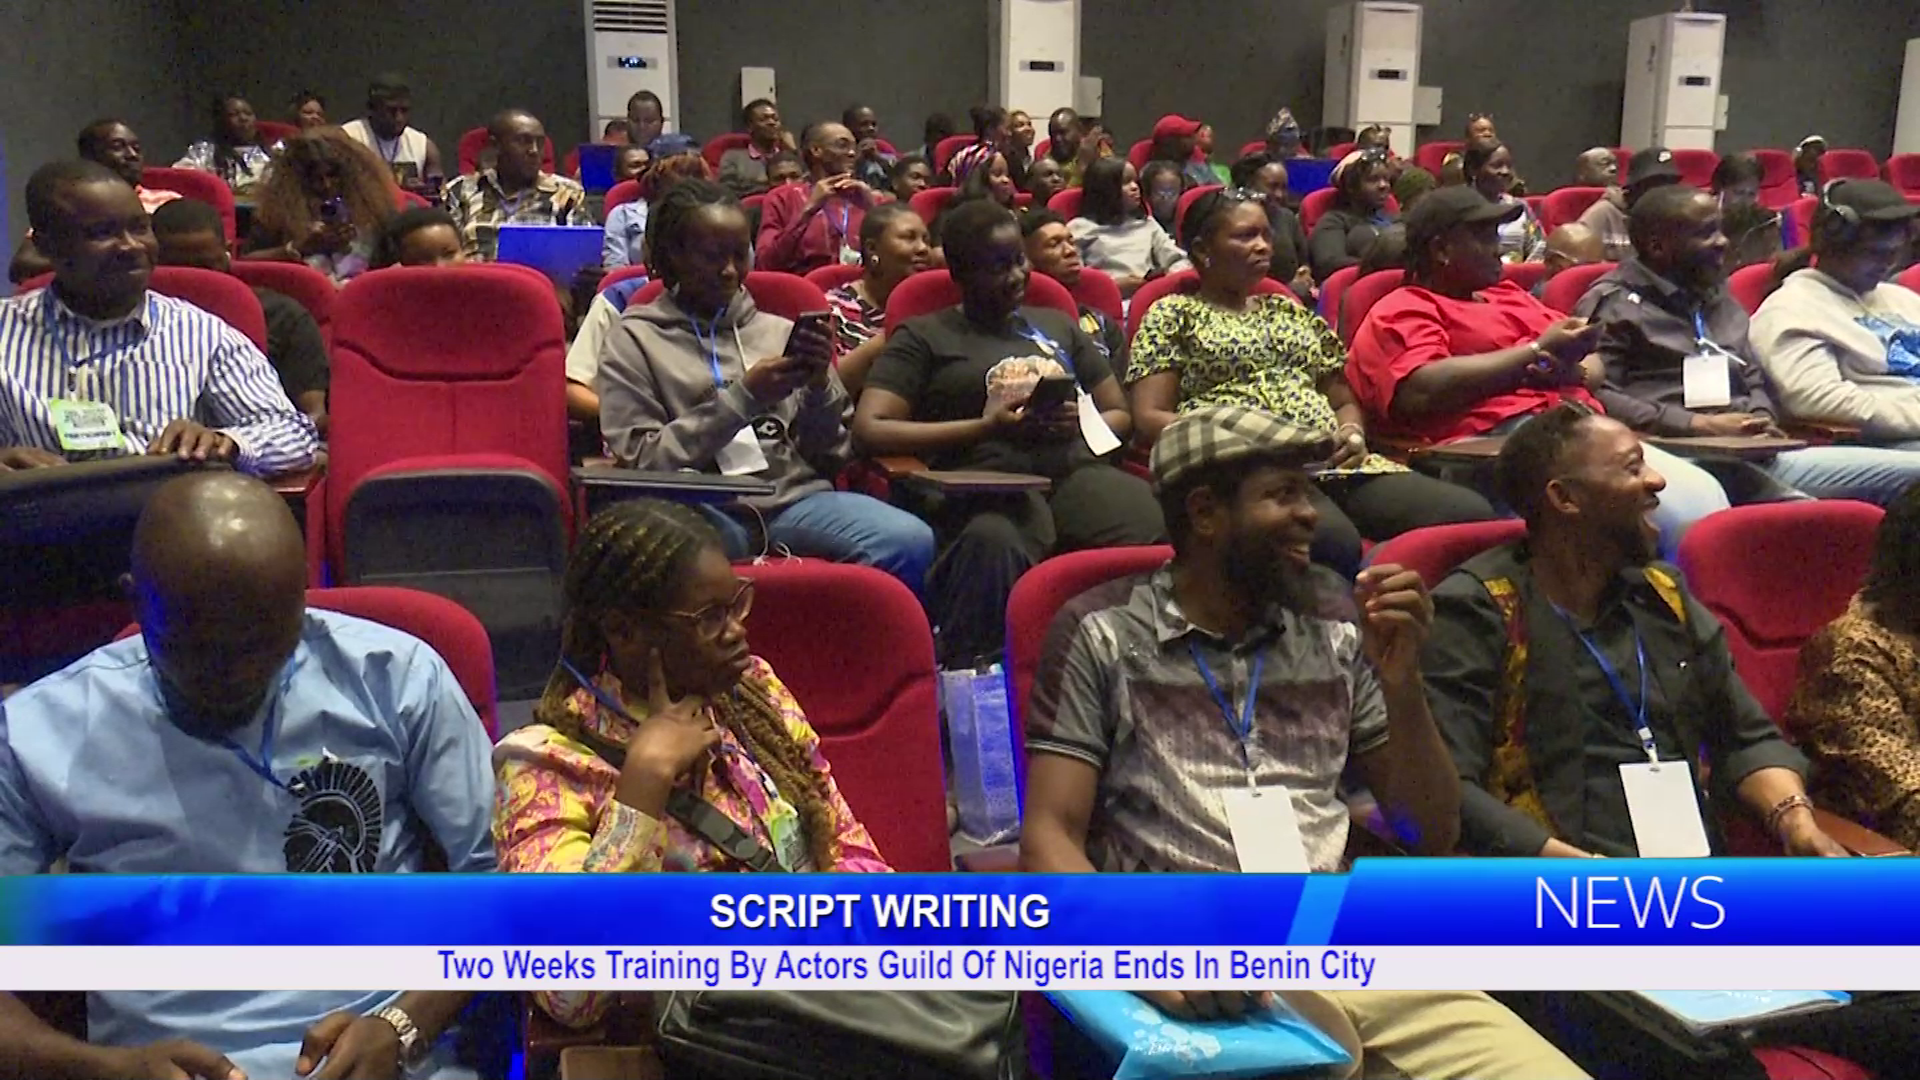 Two-Week Training by Actors Guild of Nigeria Concludes in Benin City